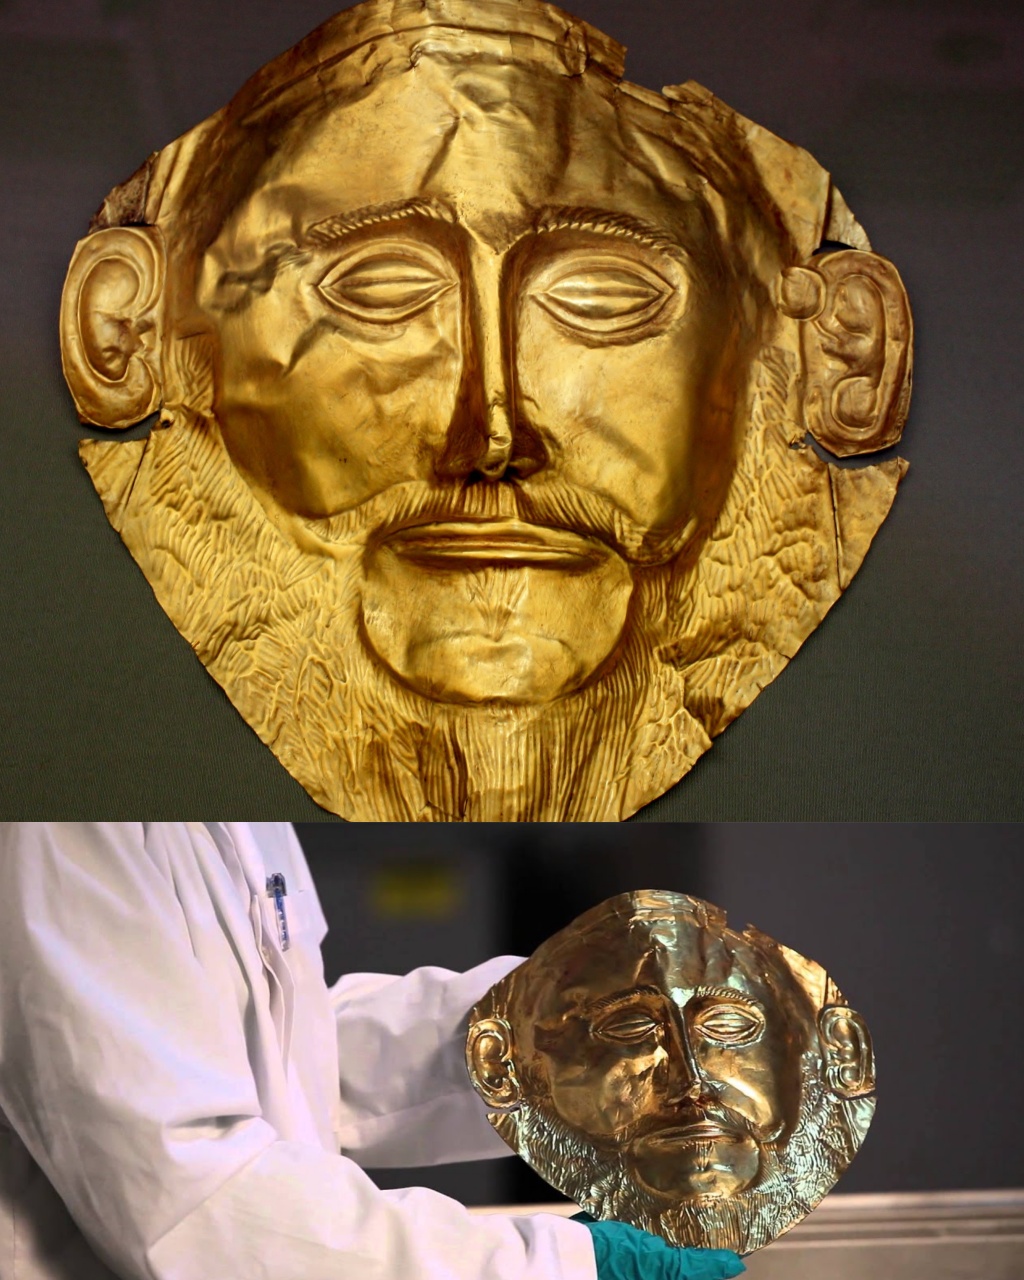 The “Mask of Agamemnon”: One of the most famous gold artifacts from the ancient Greek Bronze Age.